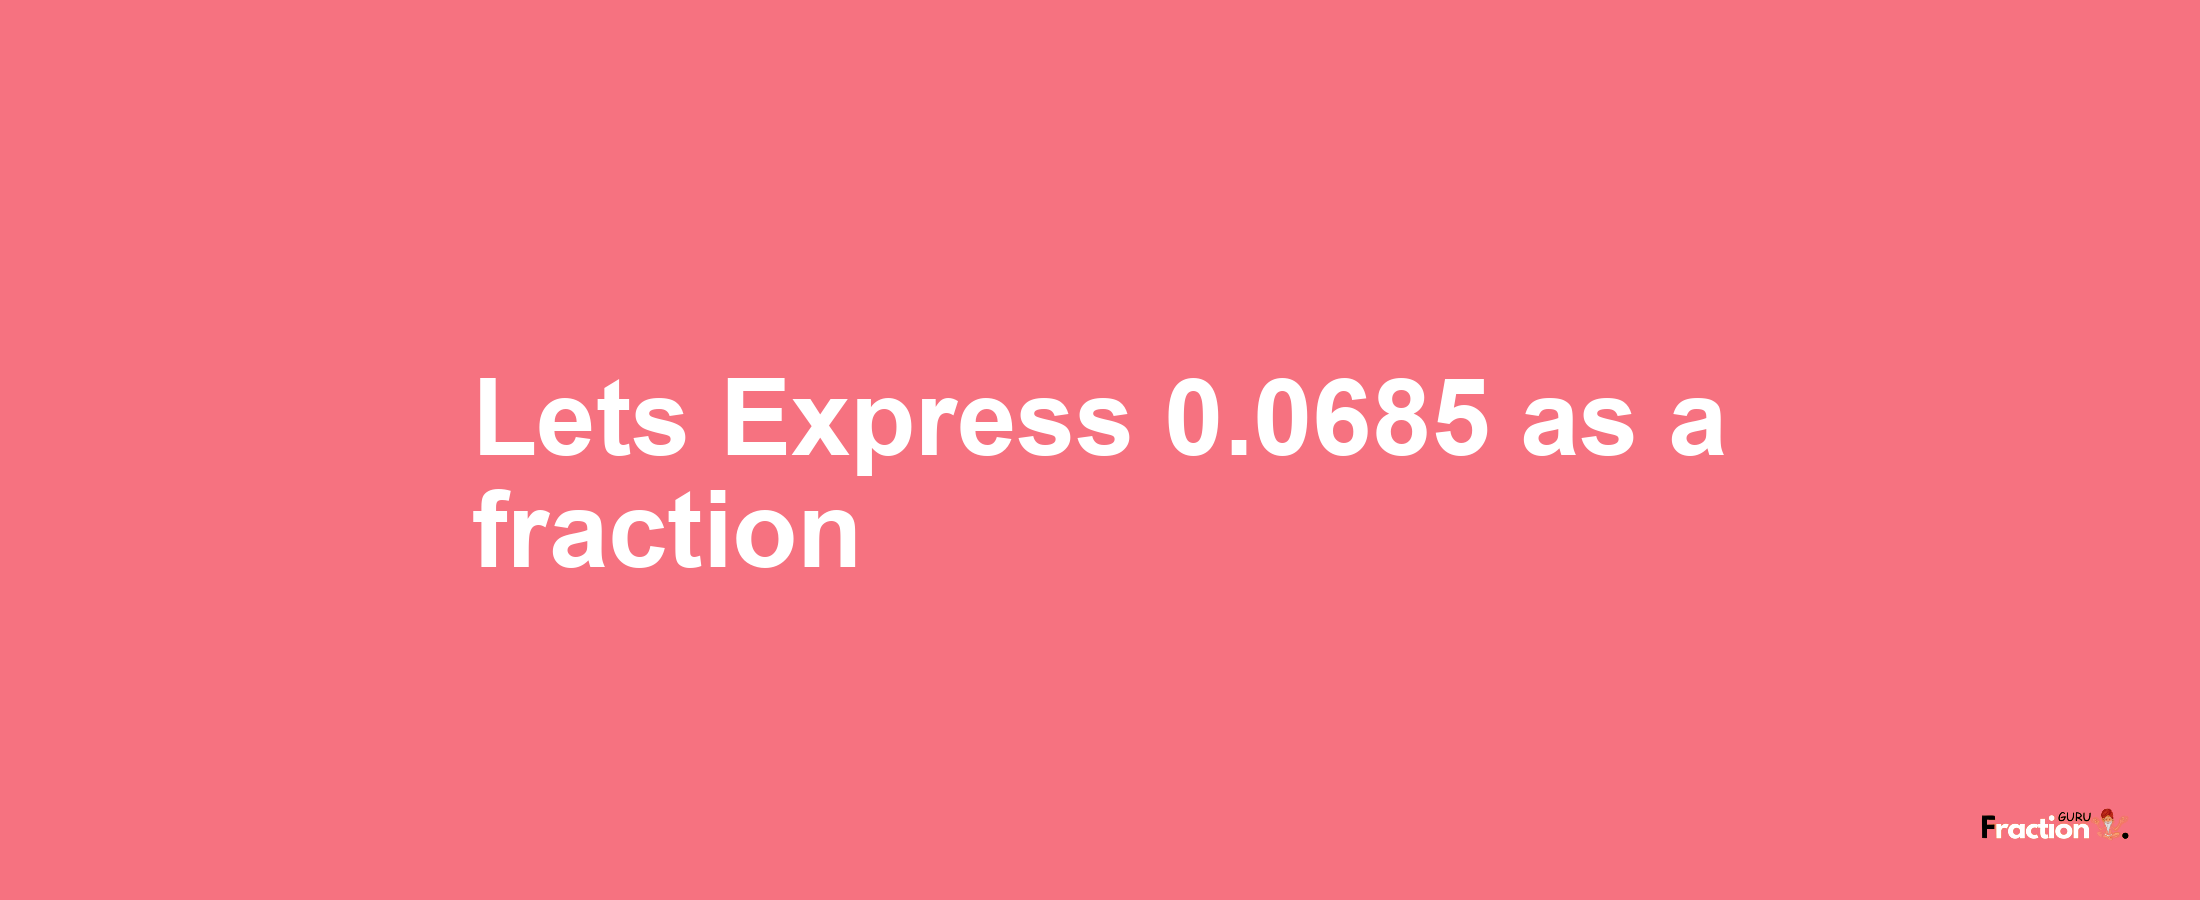 Lets Express 0.0685 as afraction